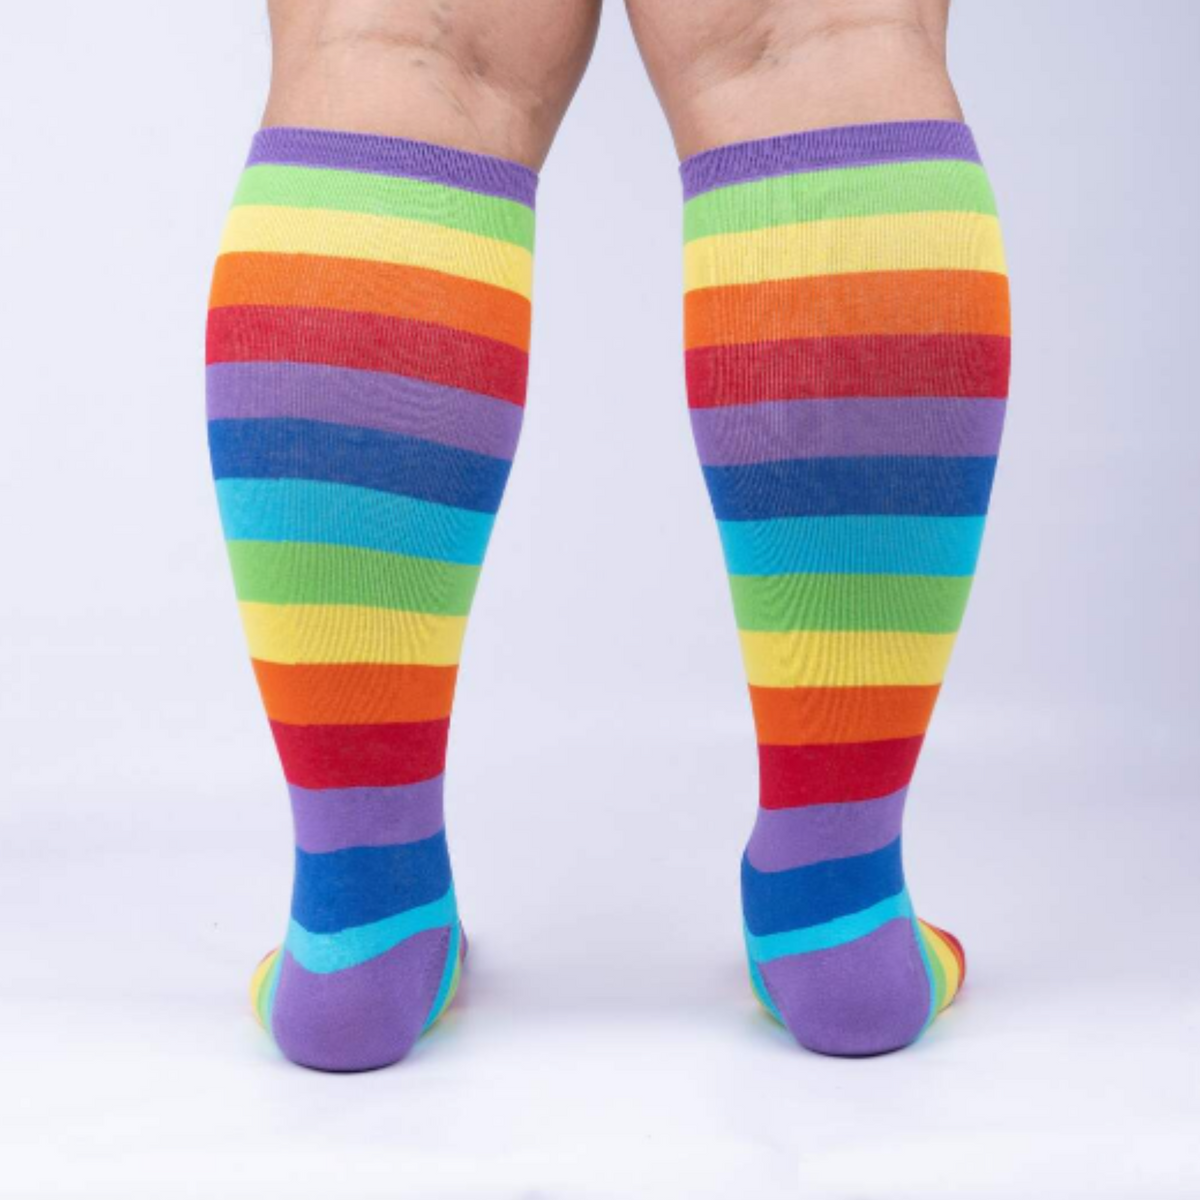 Sock It To Me Super Juicy extra-stretchy knee high socks featuring rainbow stripes all over. Socks shown on model from behind.